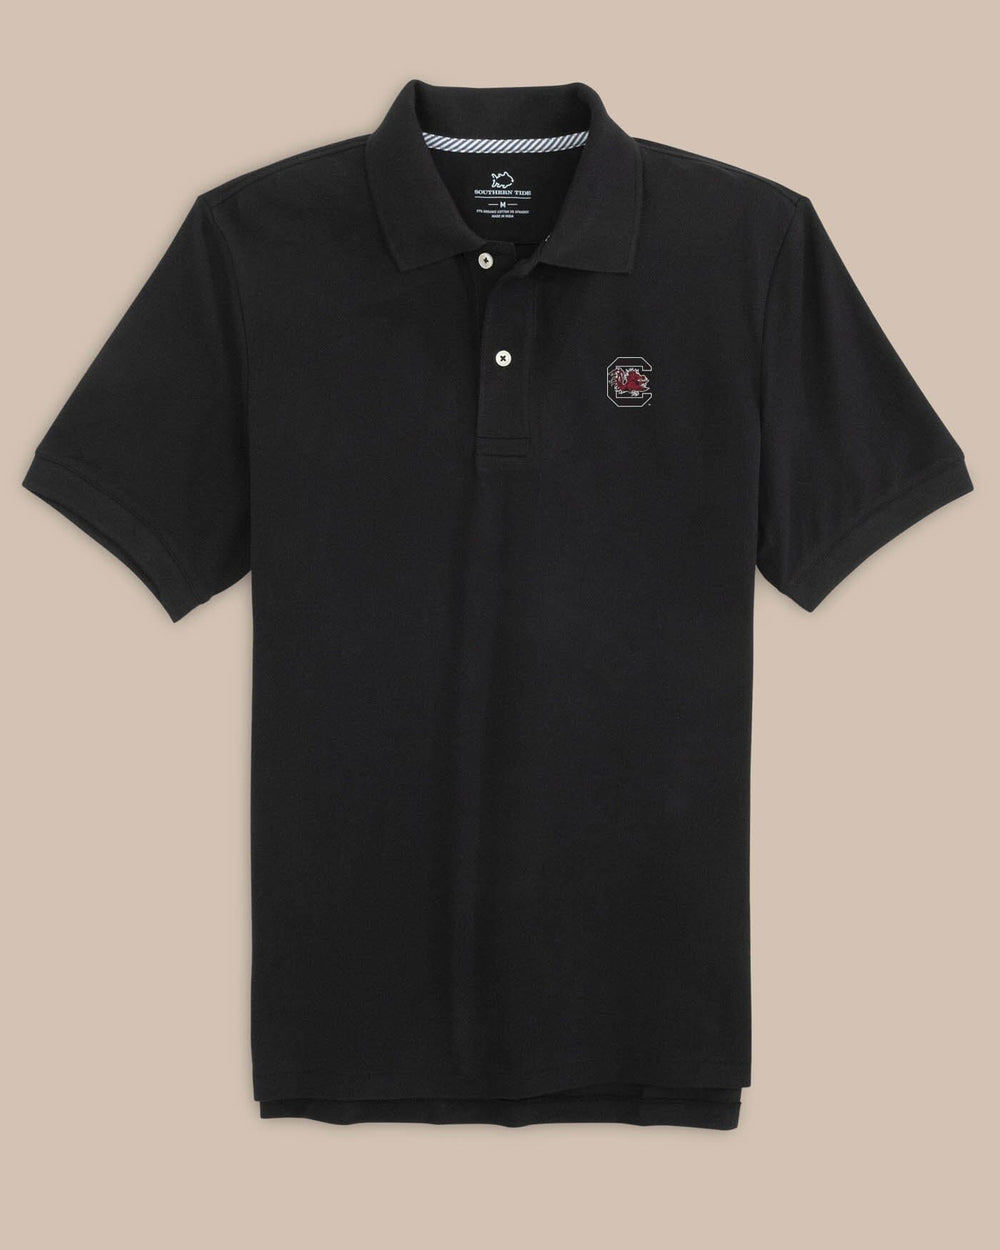 The front view of the South Carolina Gamecocks Skipjack Polo by Southern Tide - Black